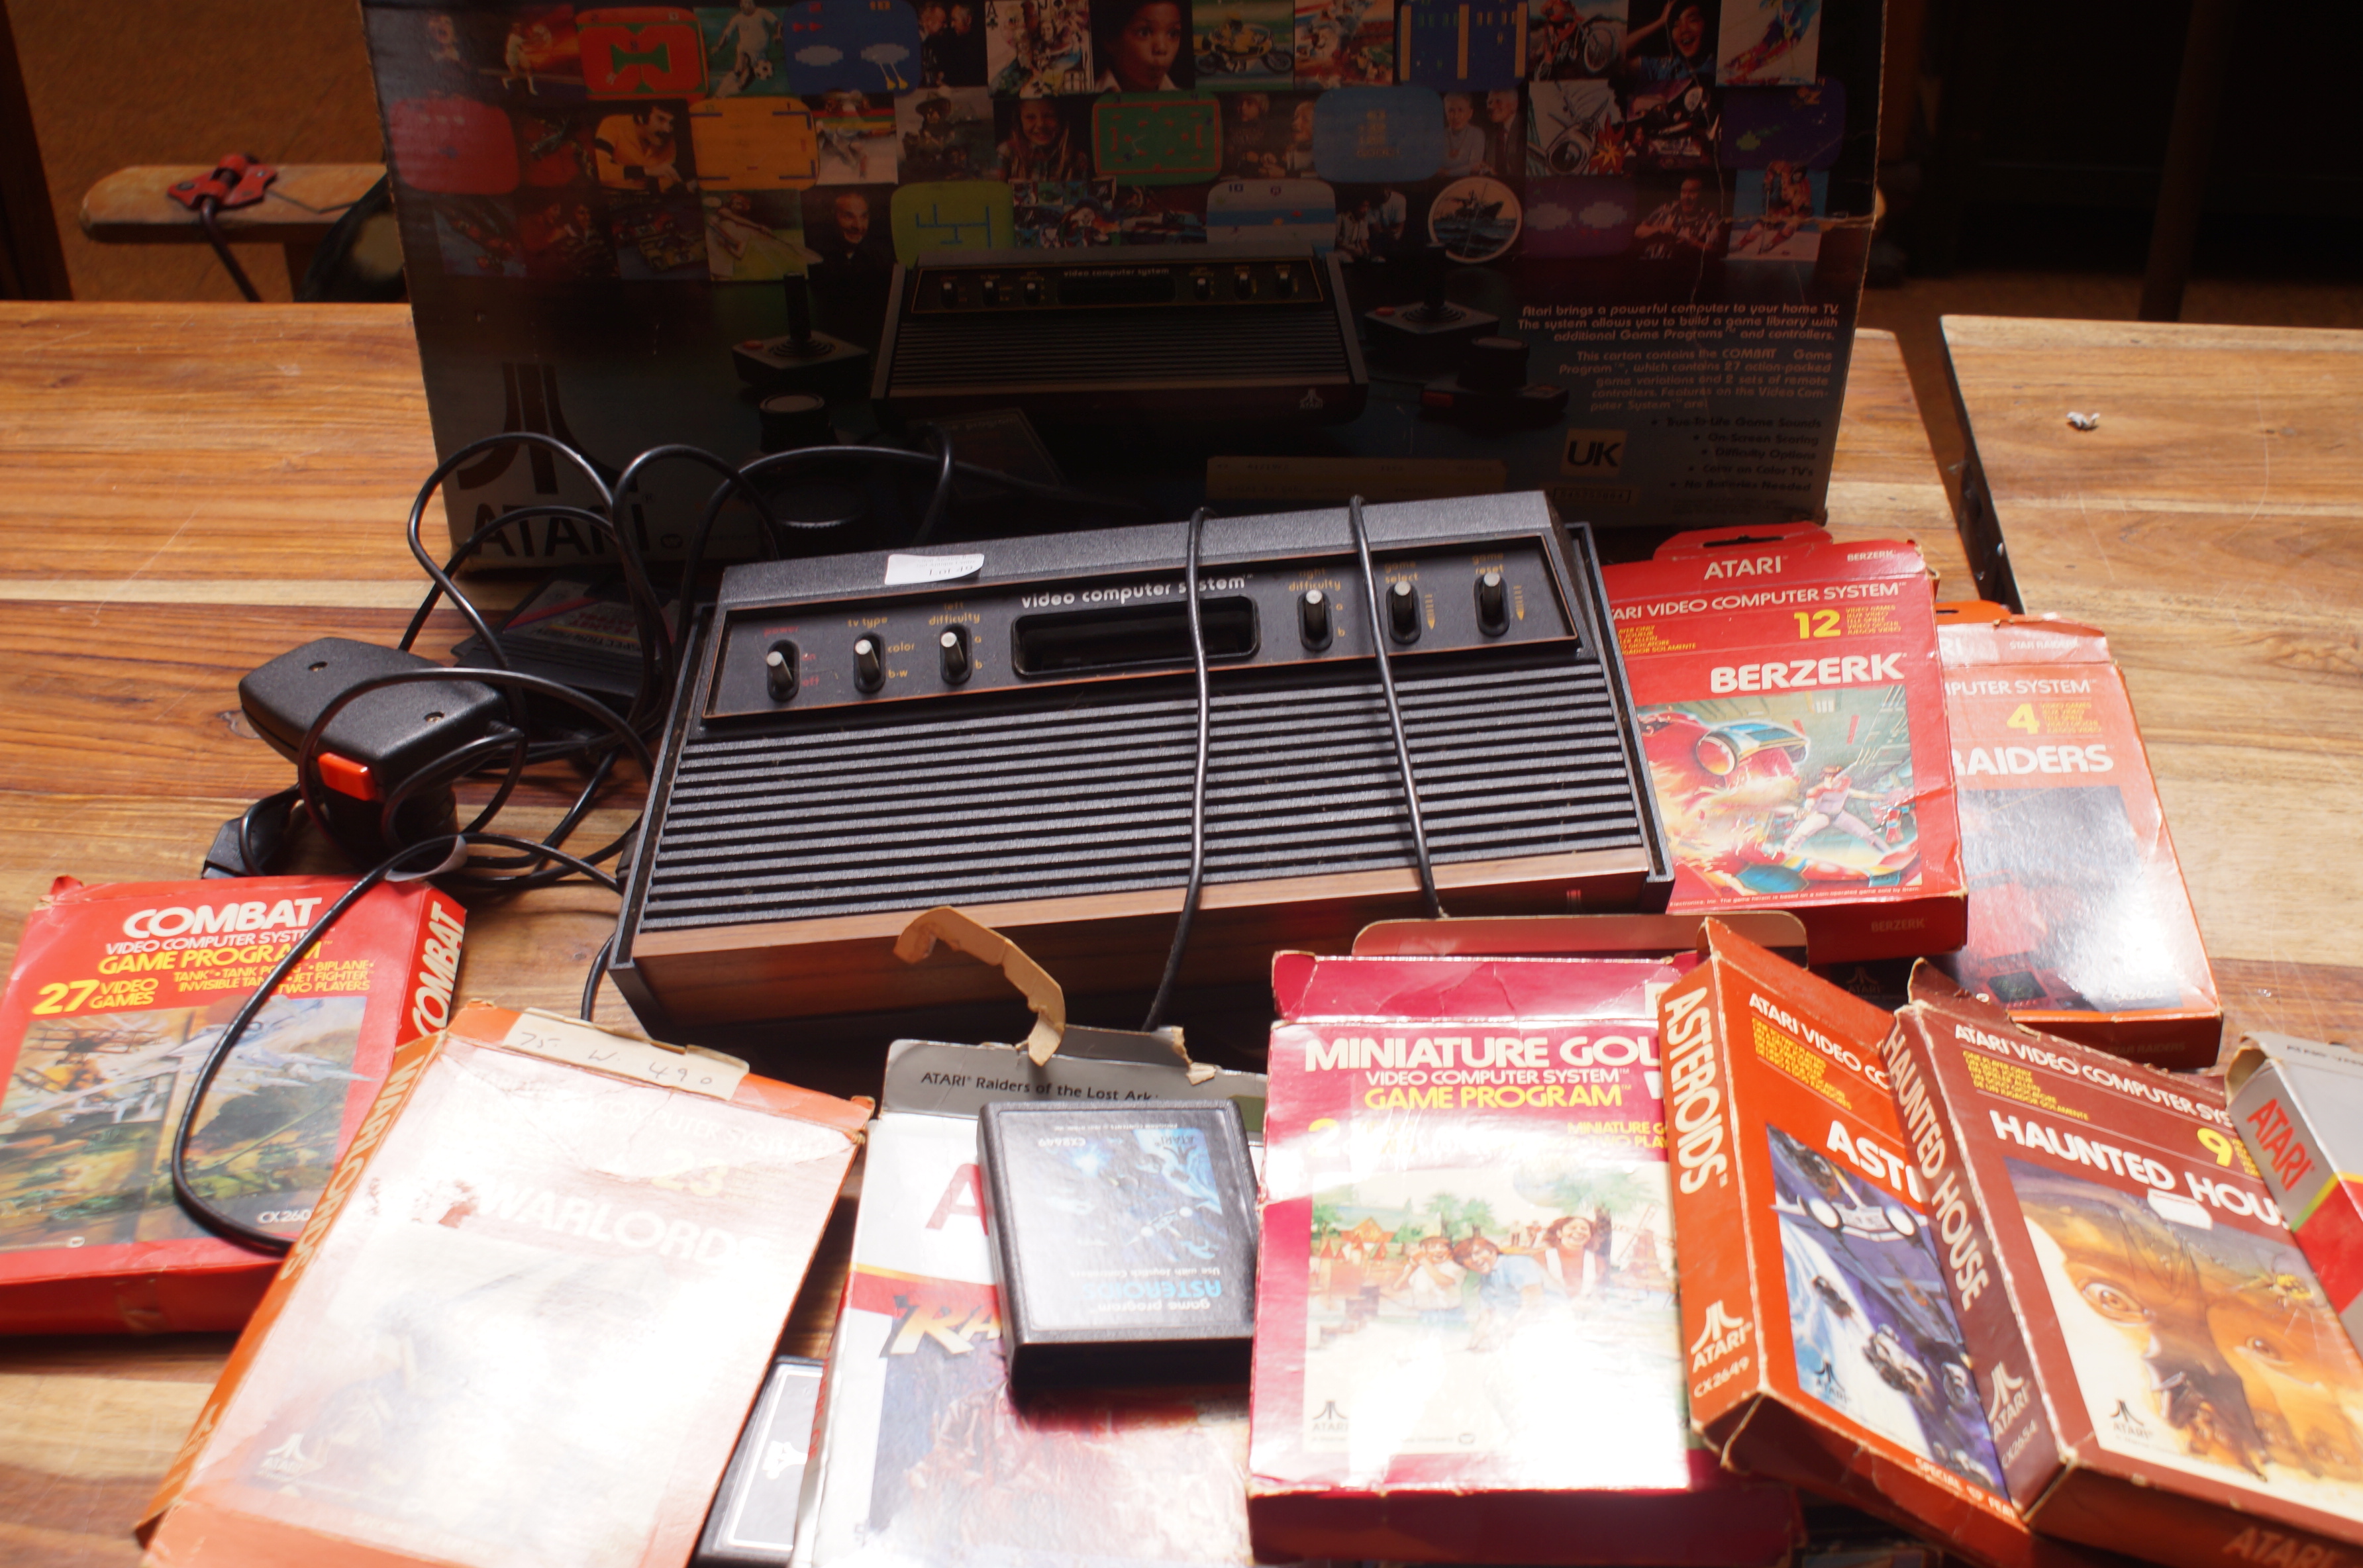 Atari video computer system with controllers, wire